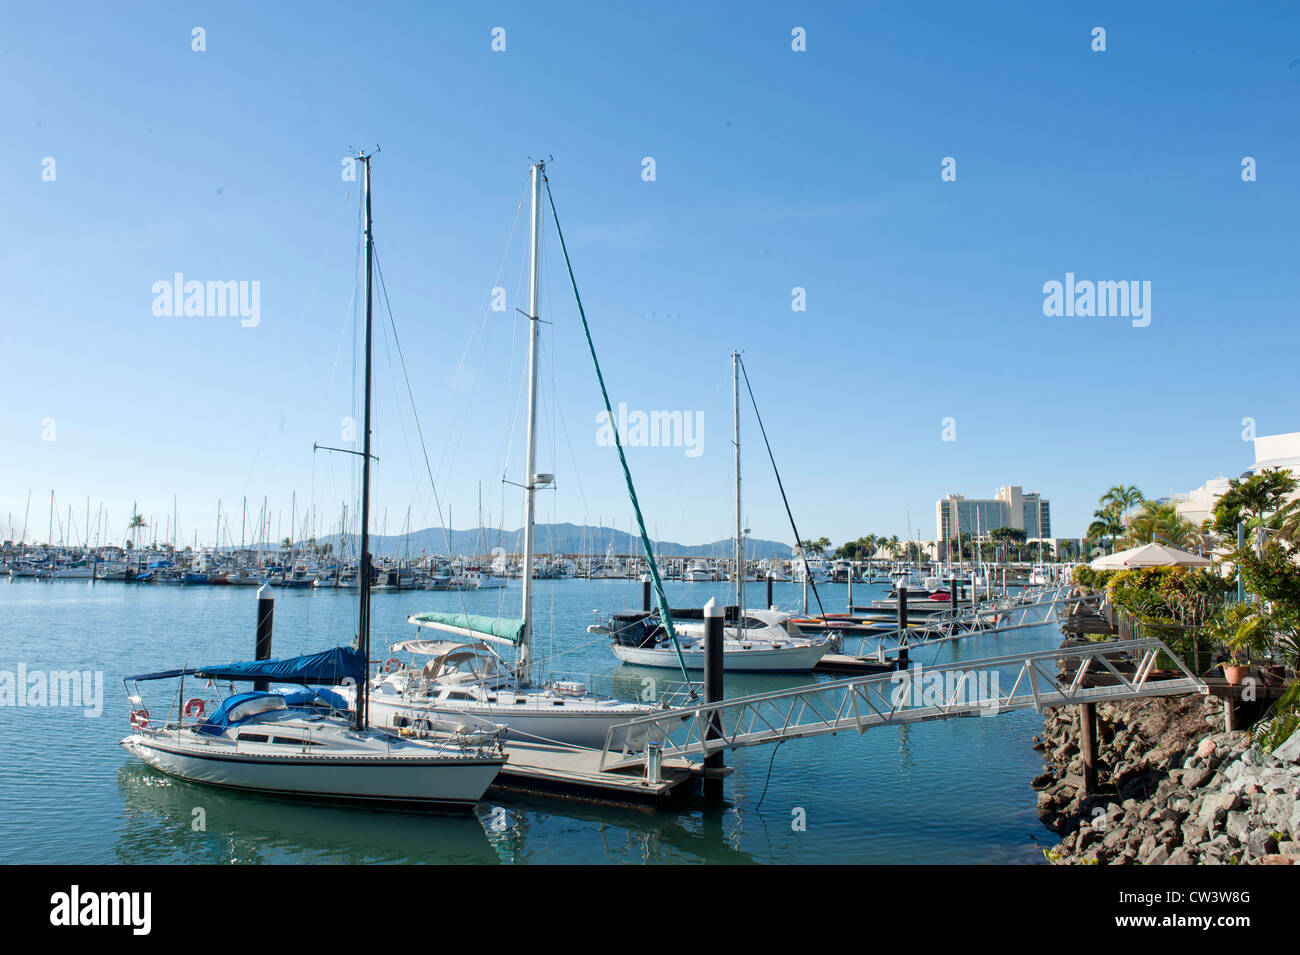 Breakwater Marina with yachts, sailboats, and motorboats at The Strand, the beach promenade of Townsville, Far North Queensland Stock Photo